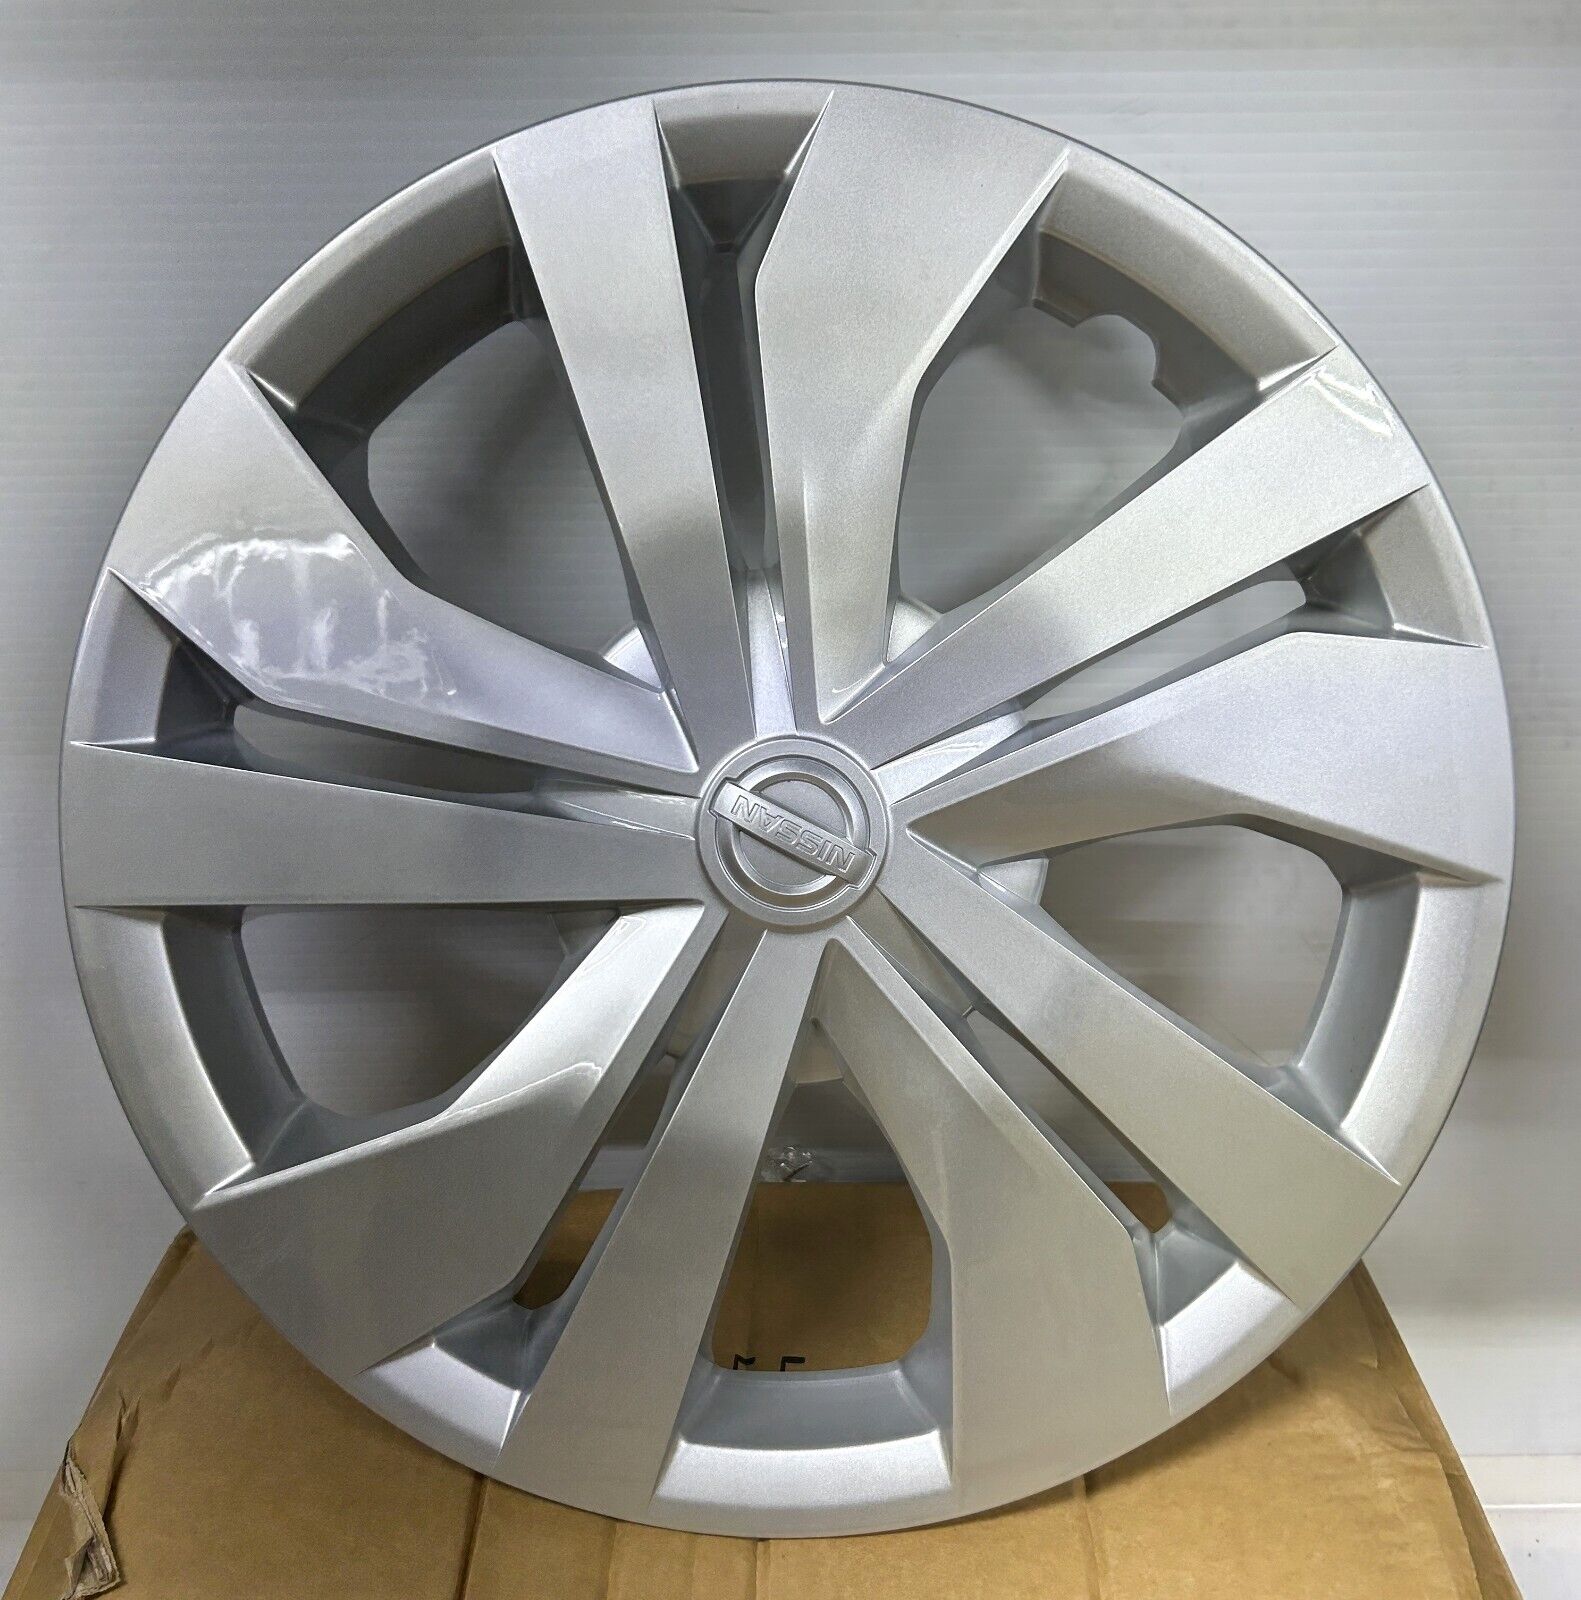 15 Inch   Wheel  Cover   Hubcap  Fits   Nissan  Versa  10135  1pc